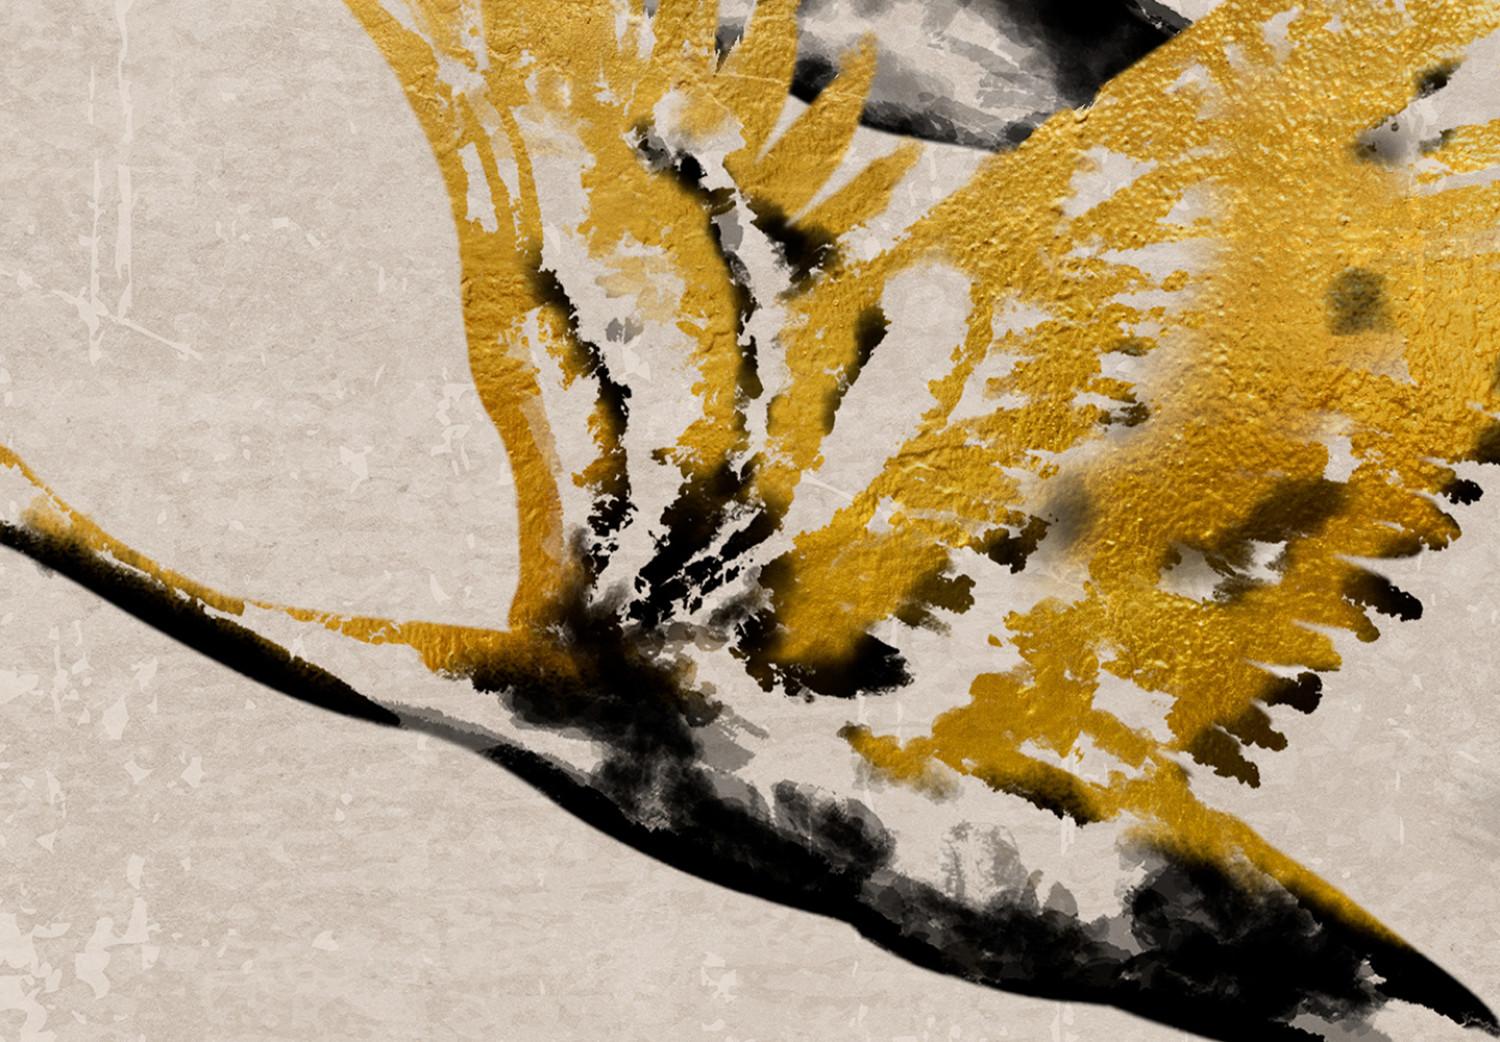 Canvas Golden cranes - a stylized japanese-style composition in beige